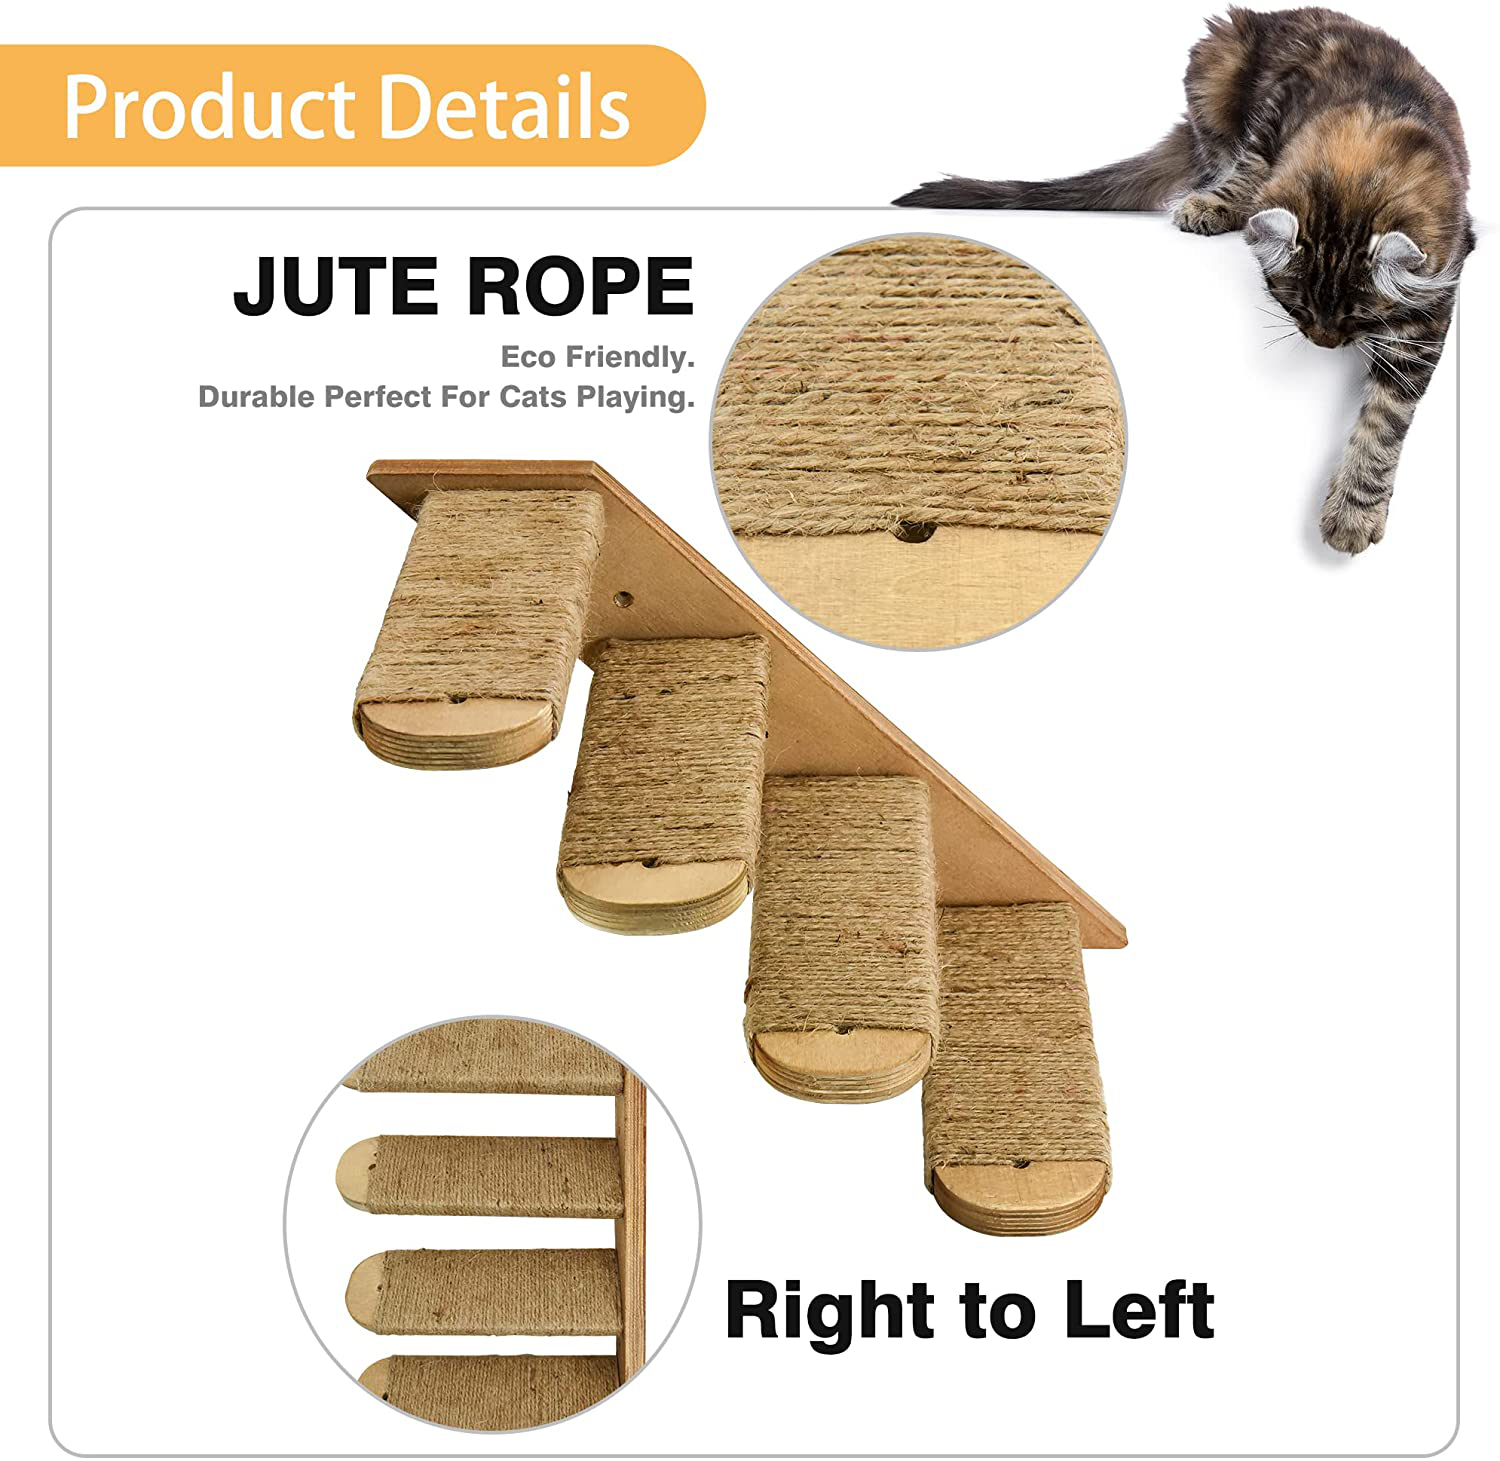 Cat Wall Shelves, Cat Wall Furniture, Cat Stairs Cat Shelves and Perches for Wall, Cat Ladder Cat Wall Steps for Scratching and Climbing, Cat Perch Wall Mounted